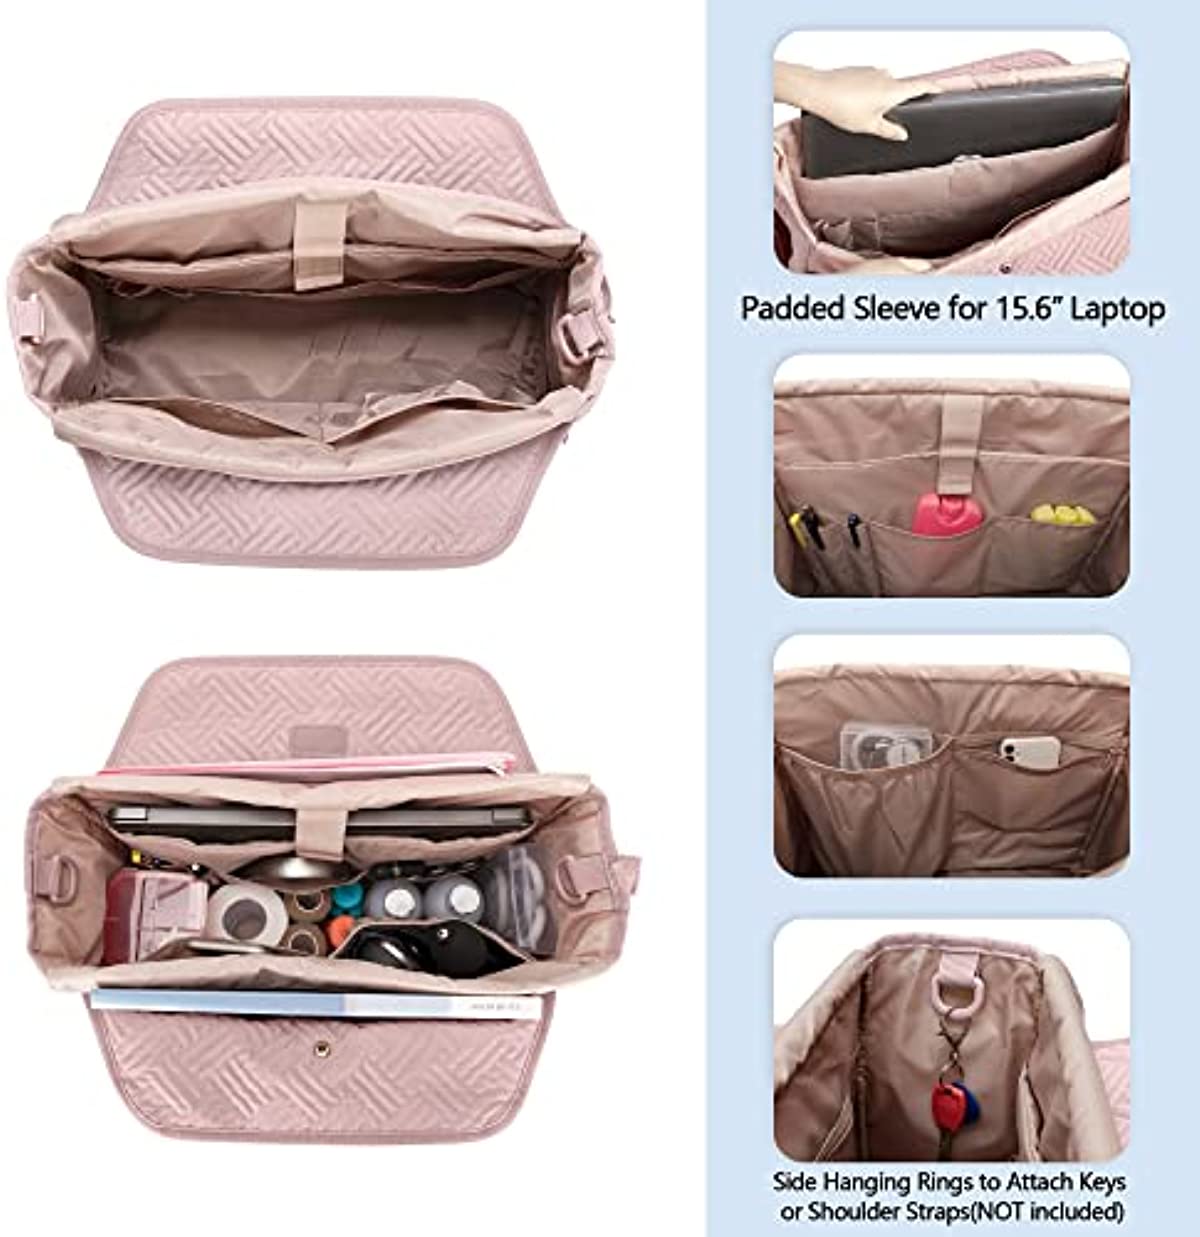 Fasrom Nurse Bag for Work Nurses with Laptop Compartment, Clinical Tote Bag for Nursing Students or Doctors, Pink (Empty Bag Only)